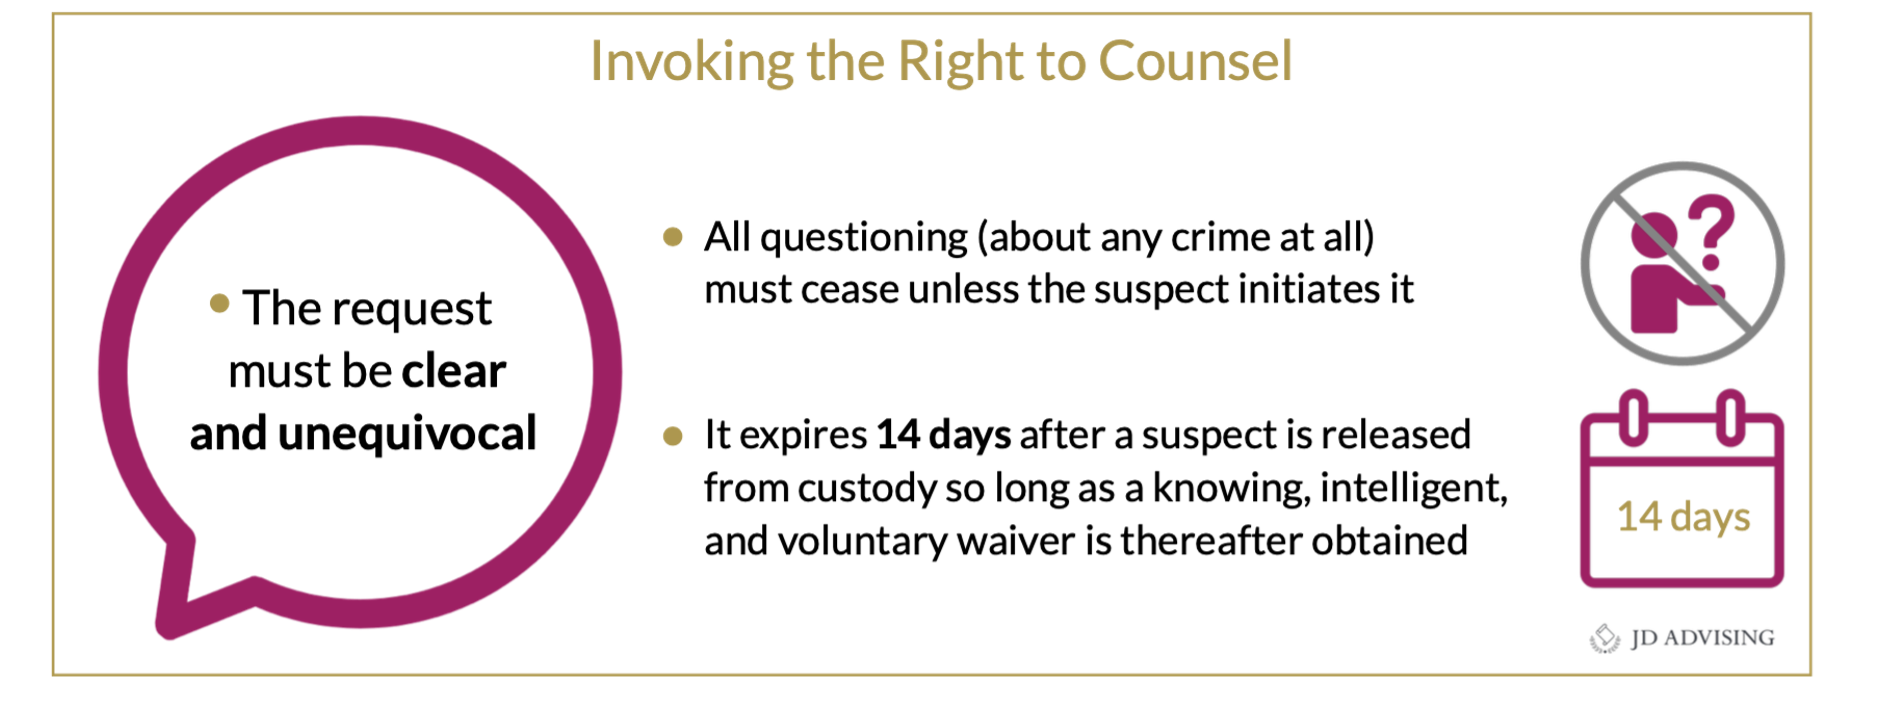 Invoking the Right to Counsel